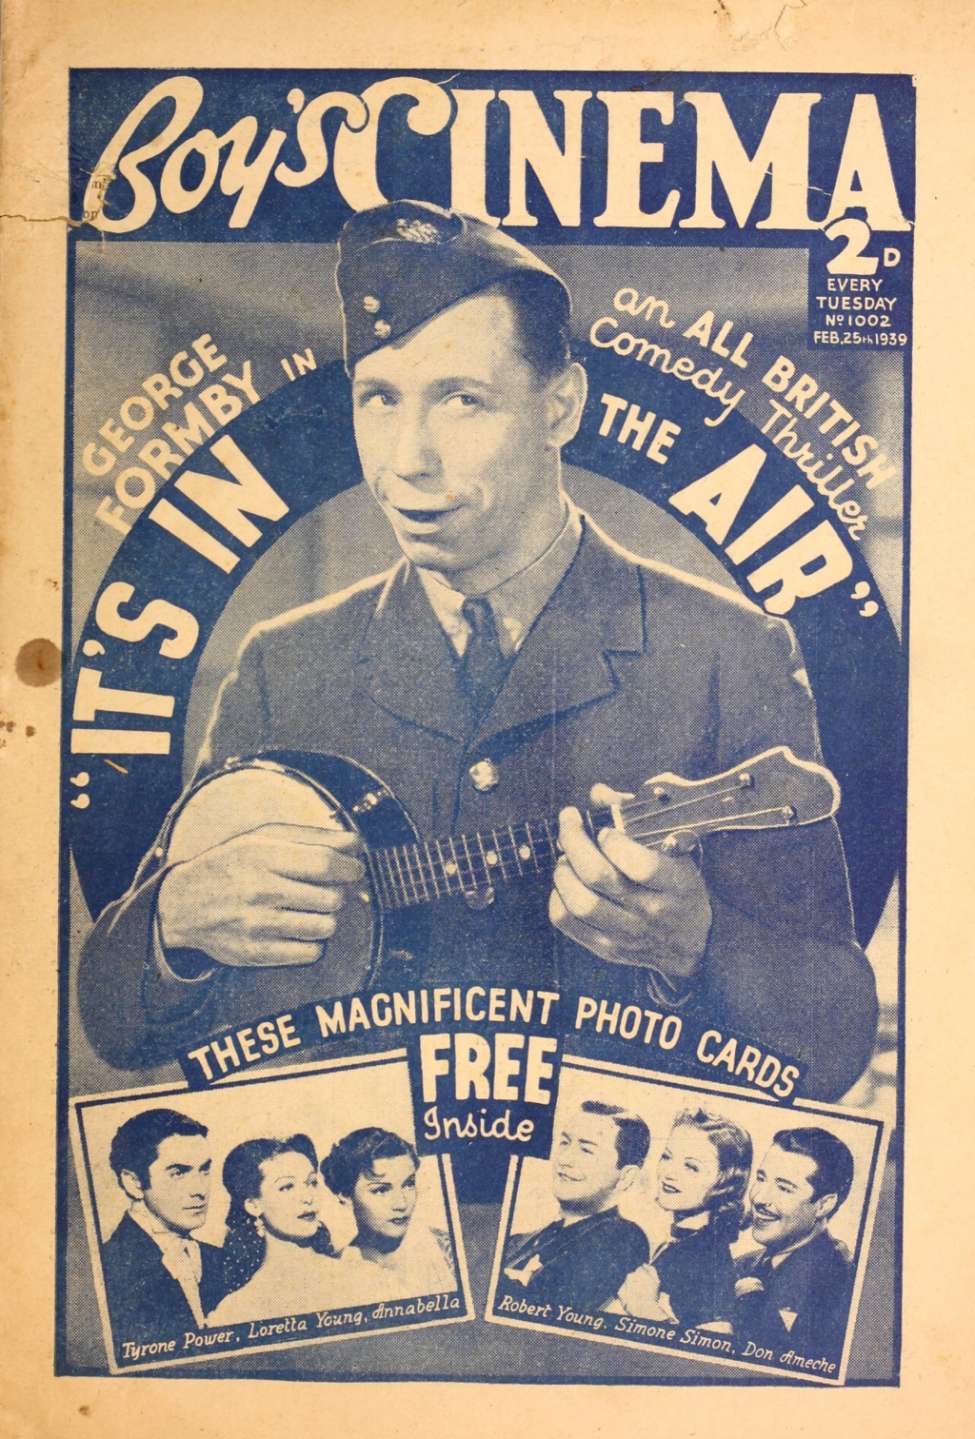 Book Cover For Boy's Cinema 1002 - It’s In the Air - George Formby